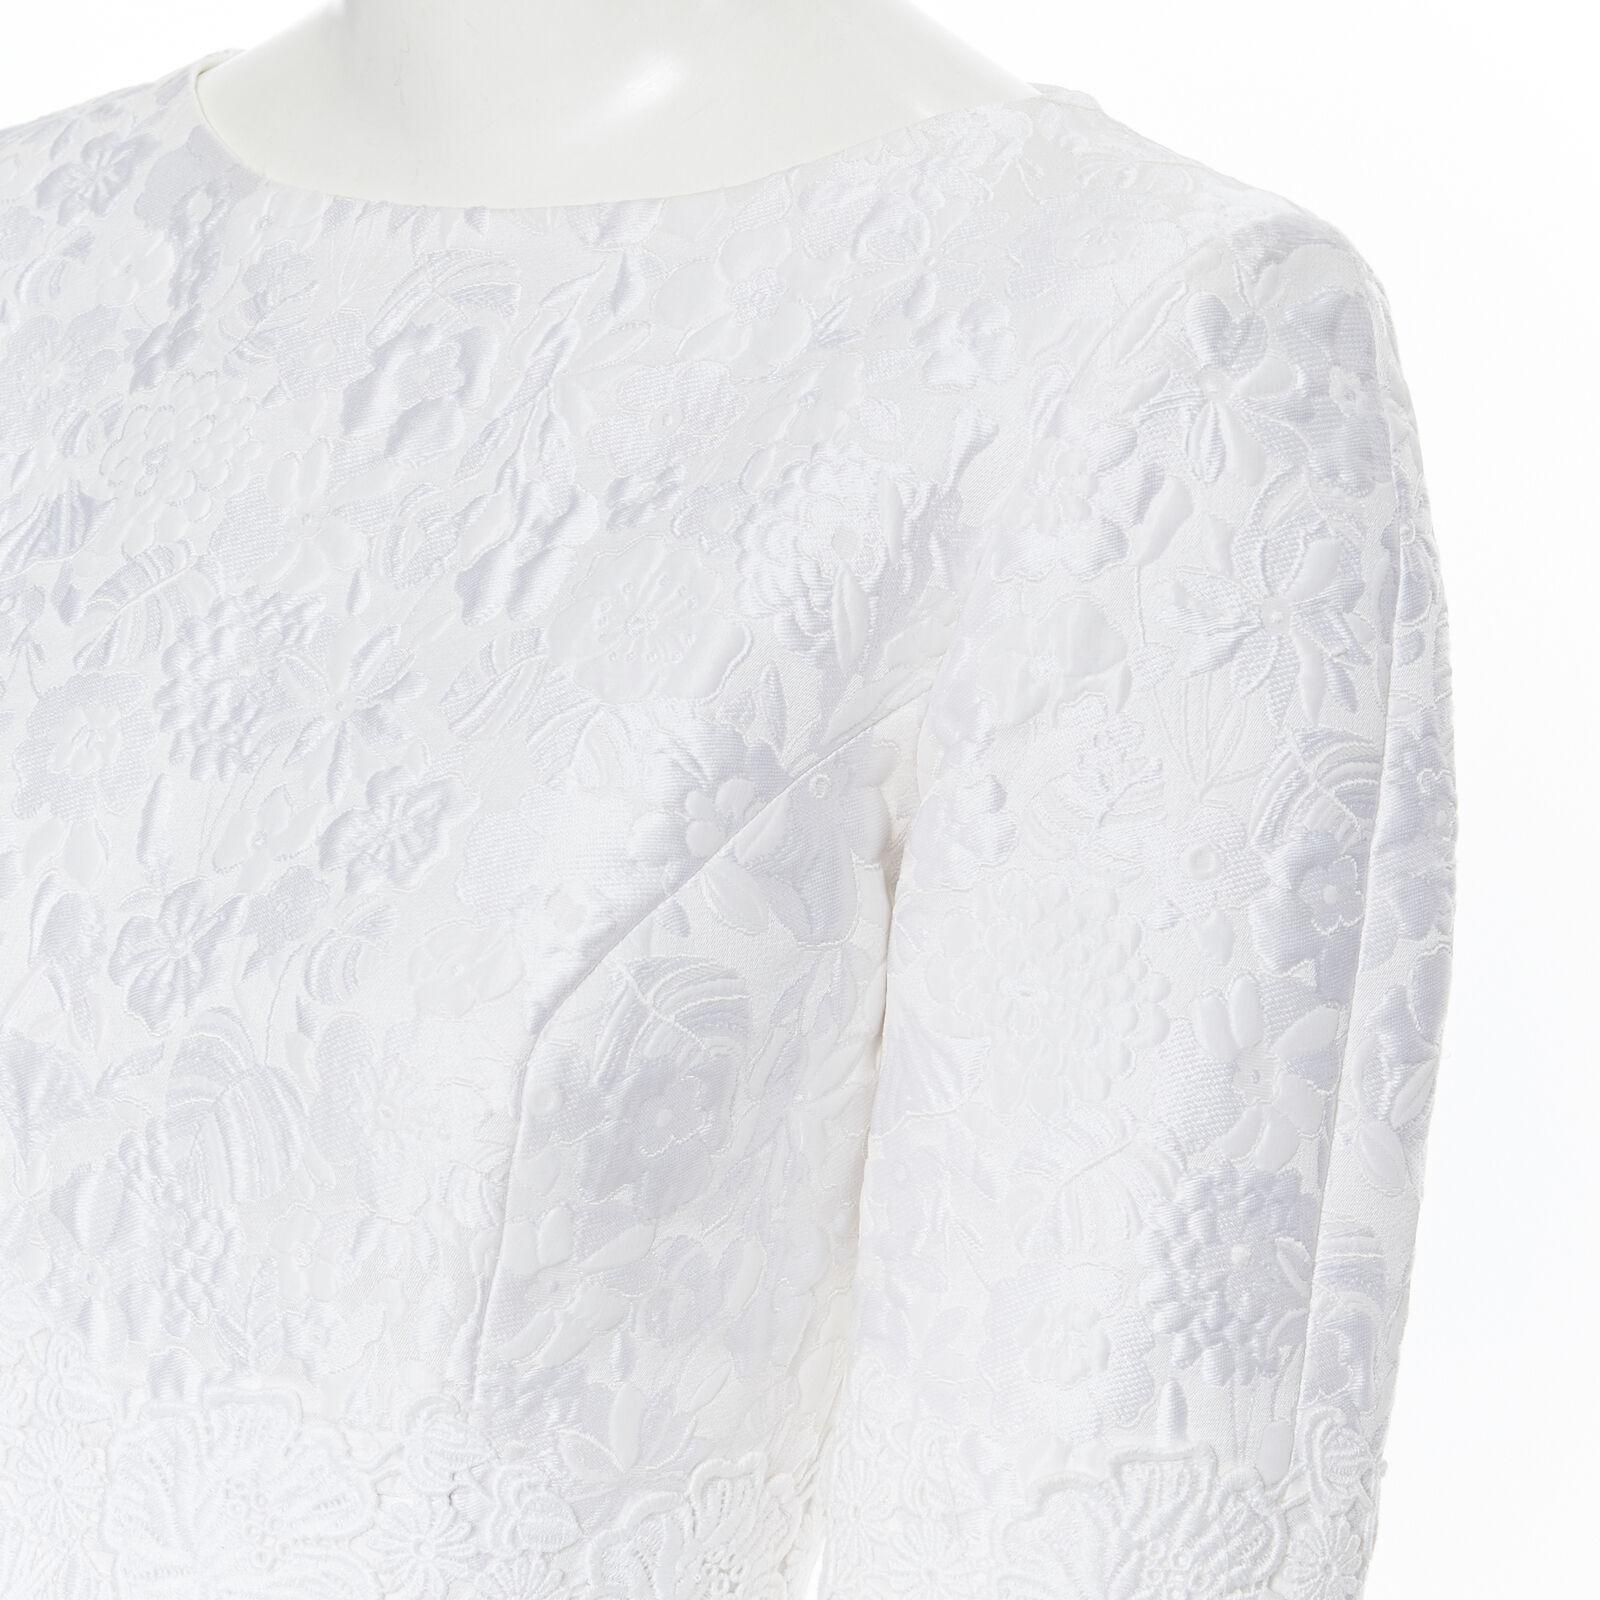 MICHAEL KORS COLLECTION white floral cloque lace trimmed 3/4 sleeve dress US0 For Sale 3